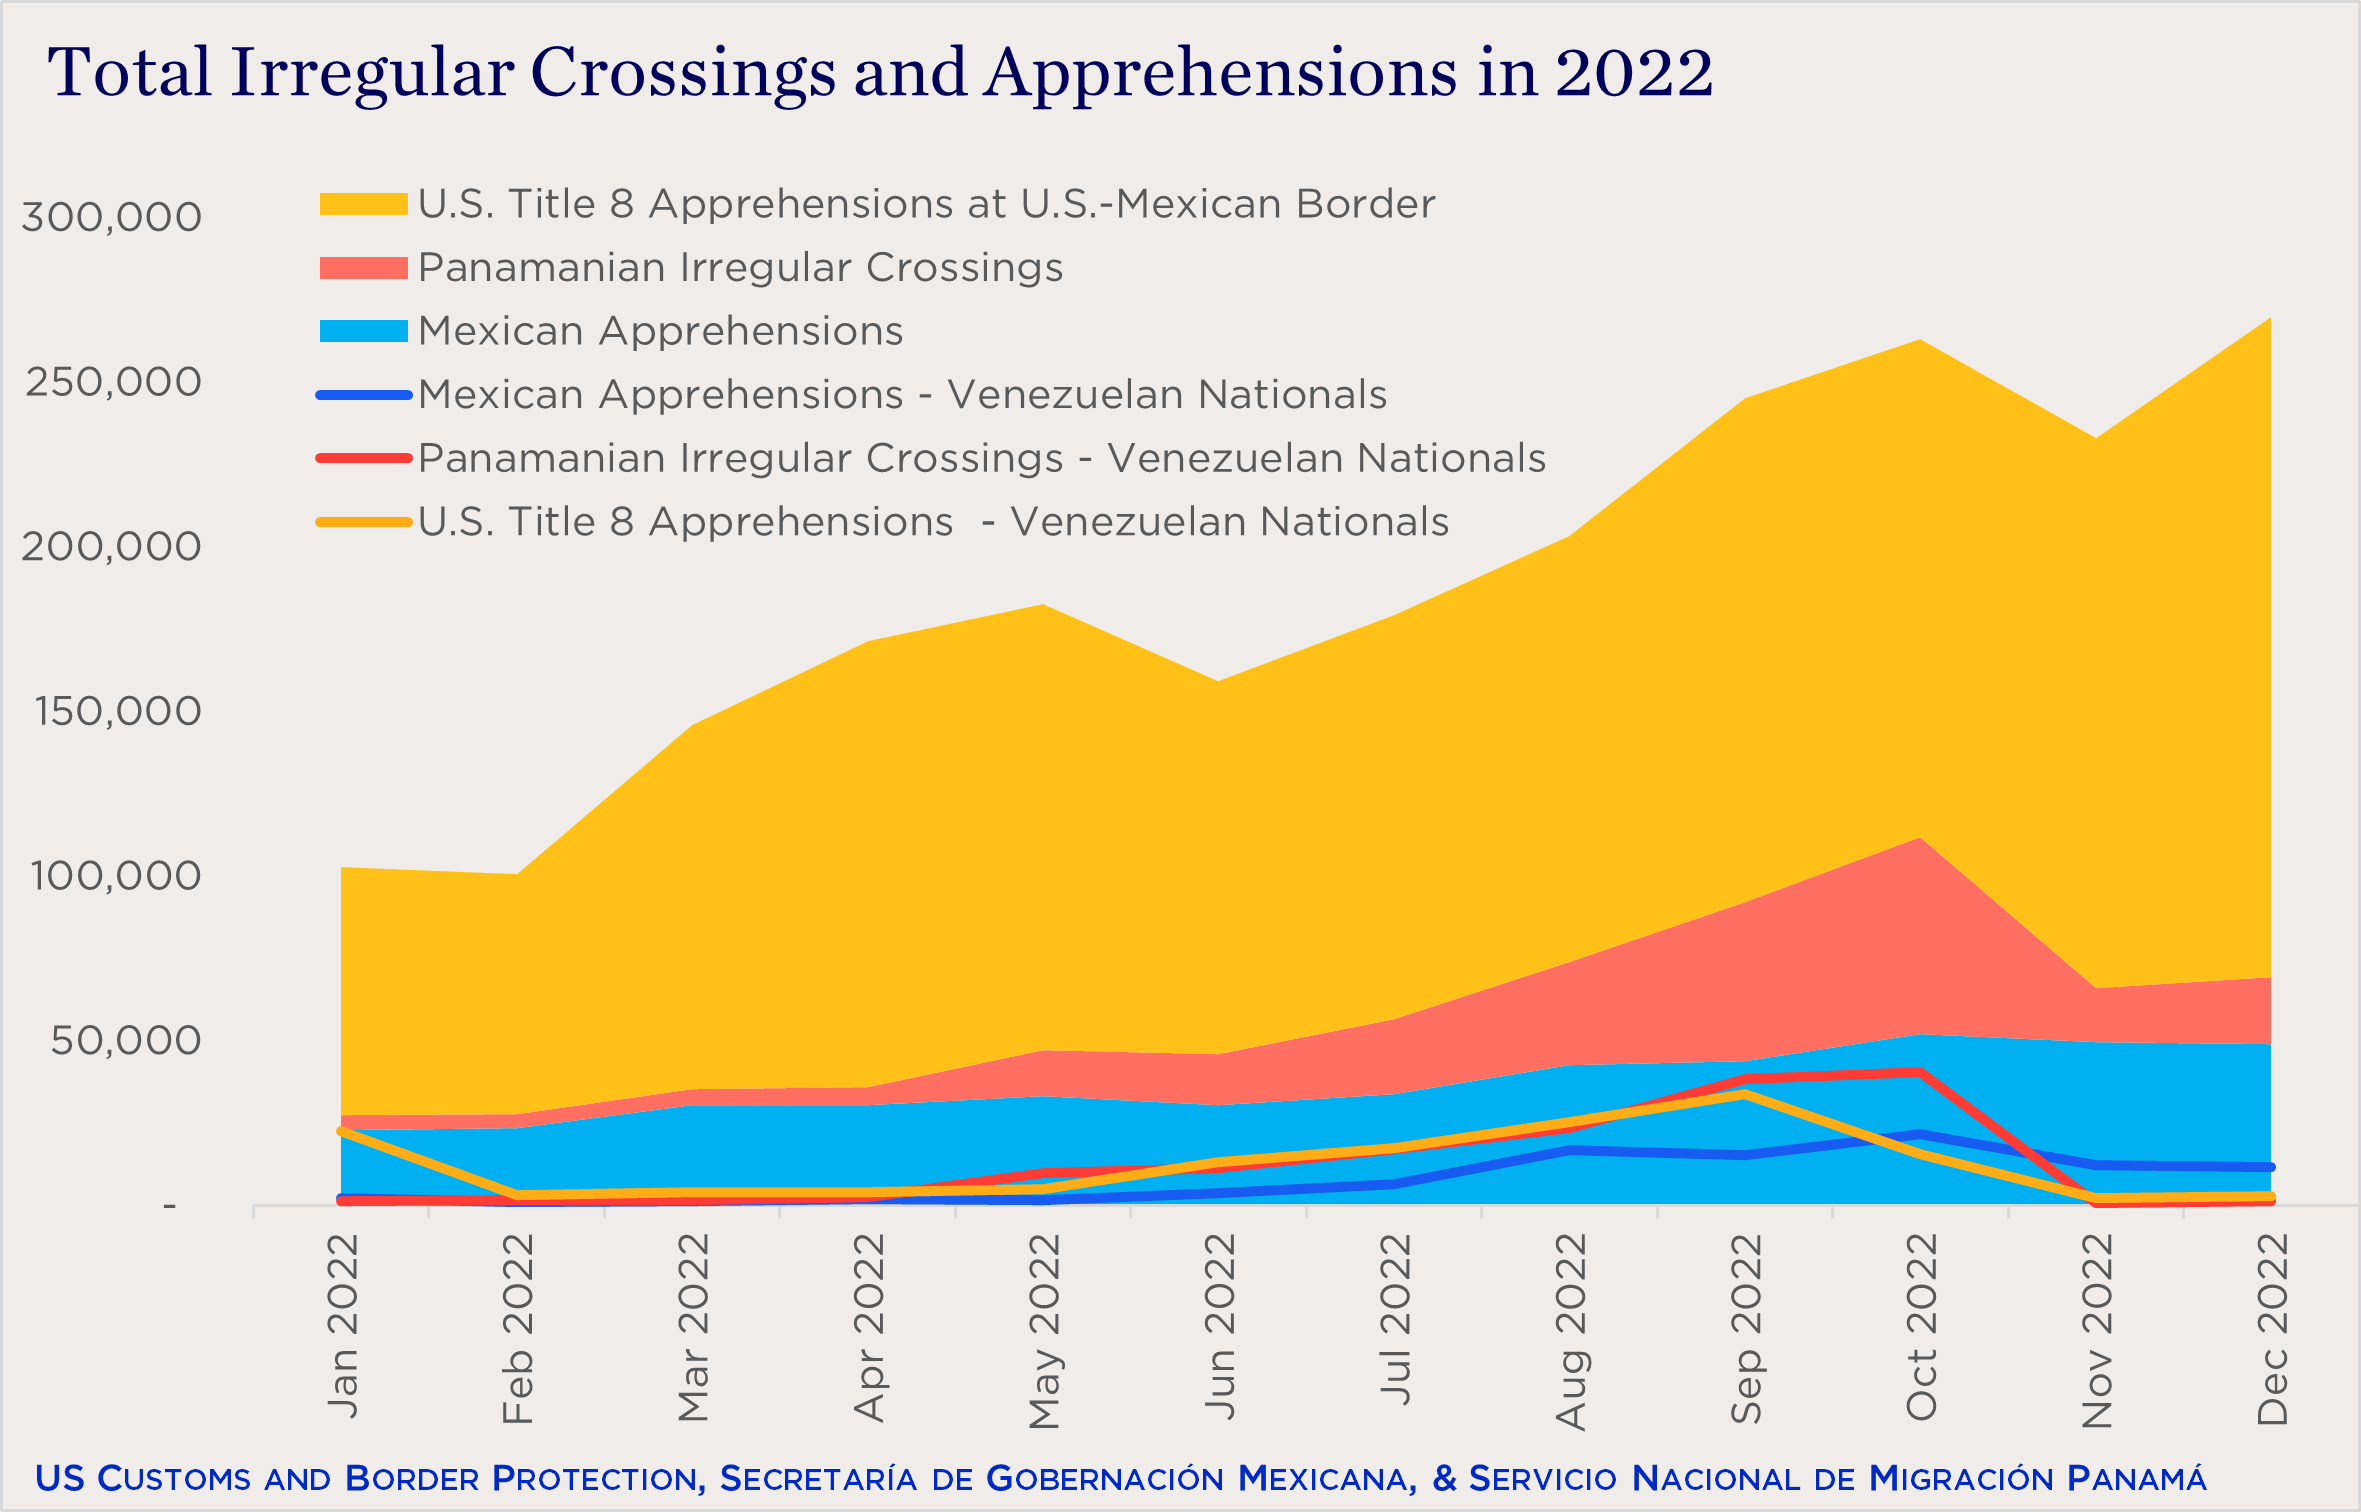 "area chart showing total irregular crossings and apprehensions in 2022"